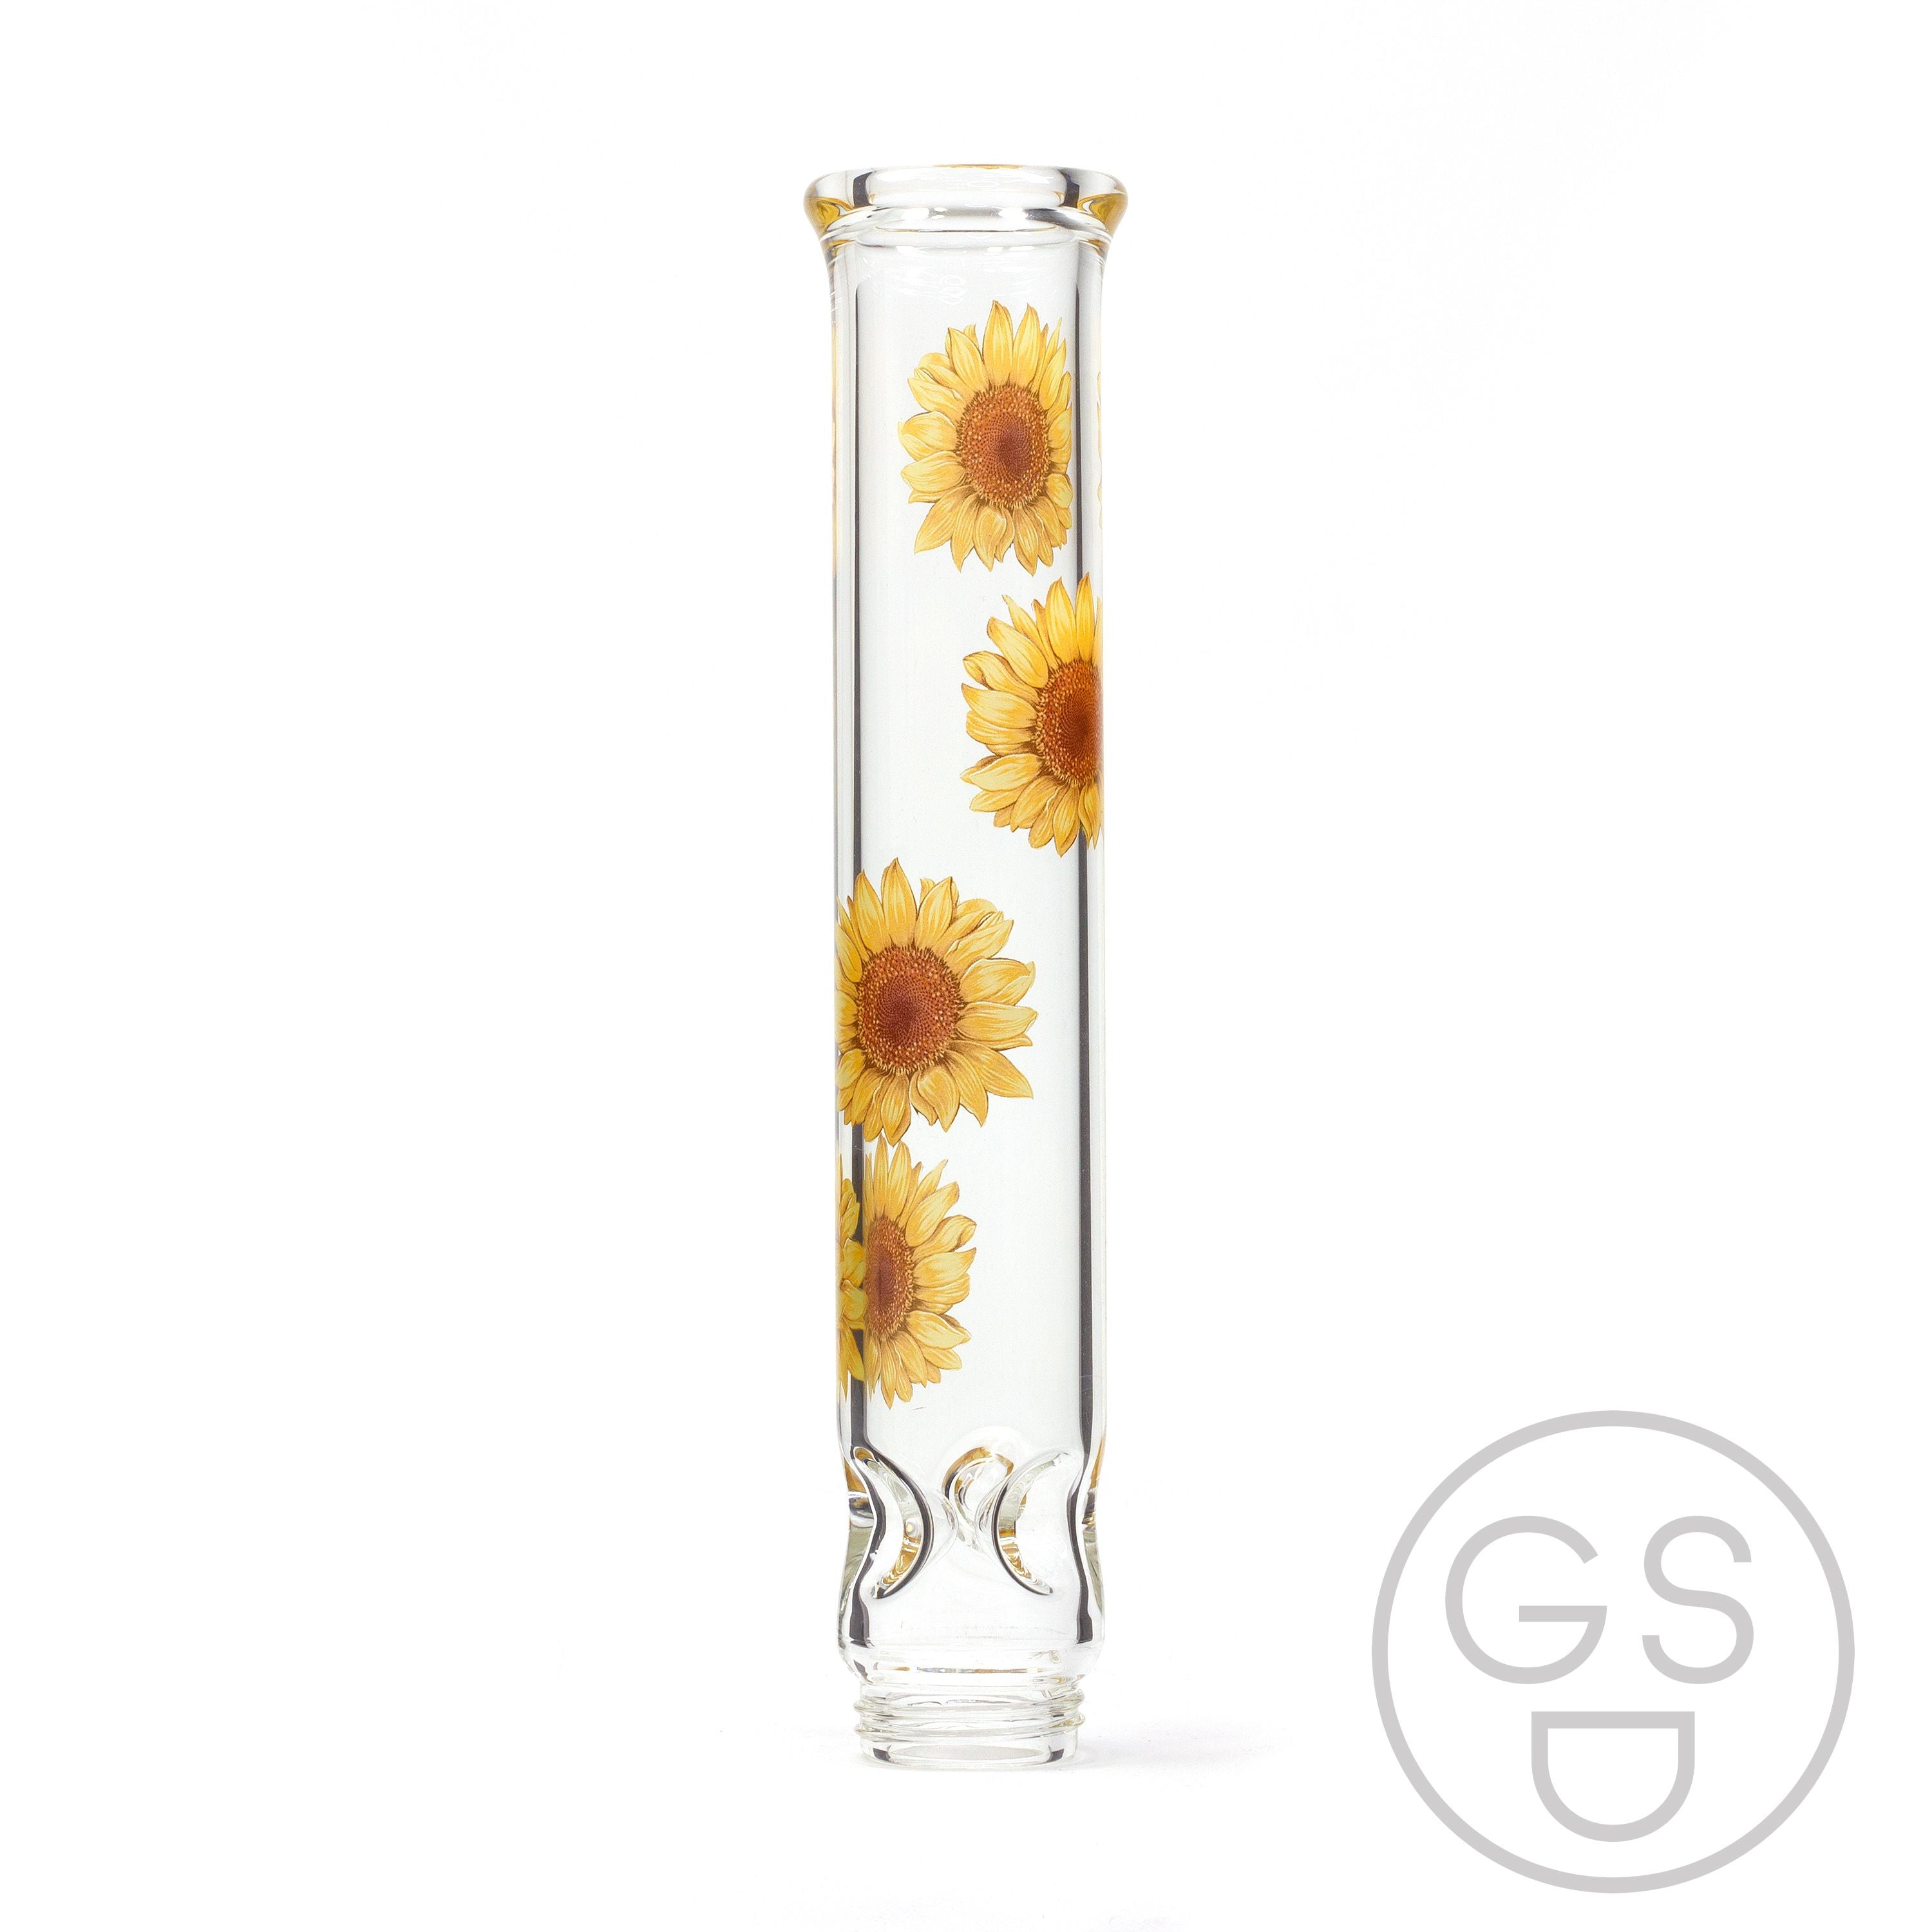 Prism Modular Waterpipe Tall Mouthpiece - Sunflower / Clear